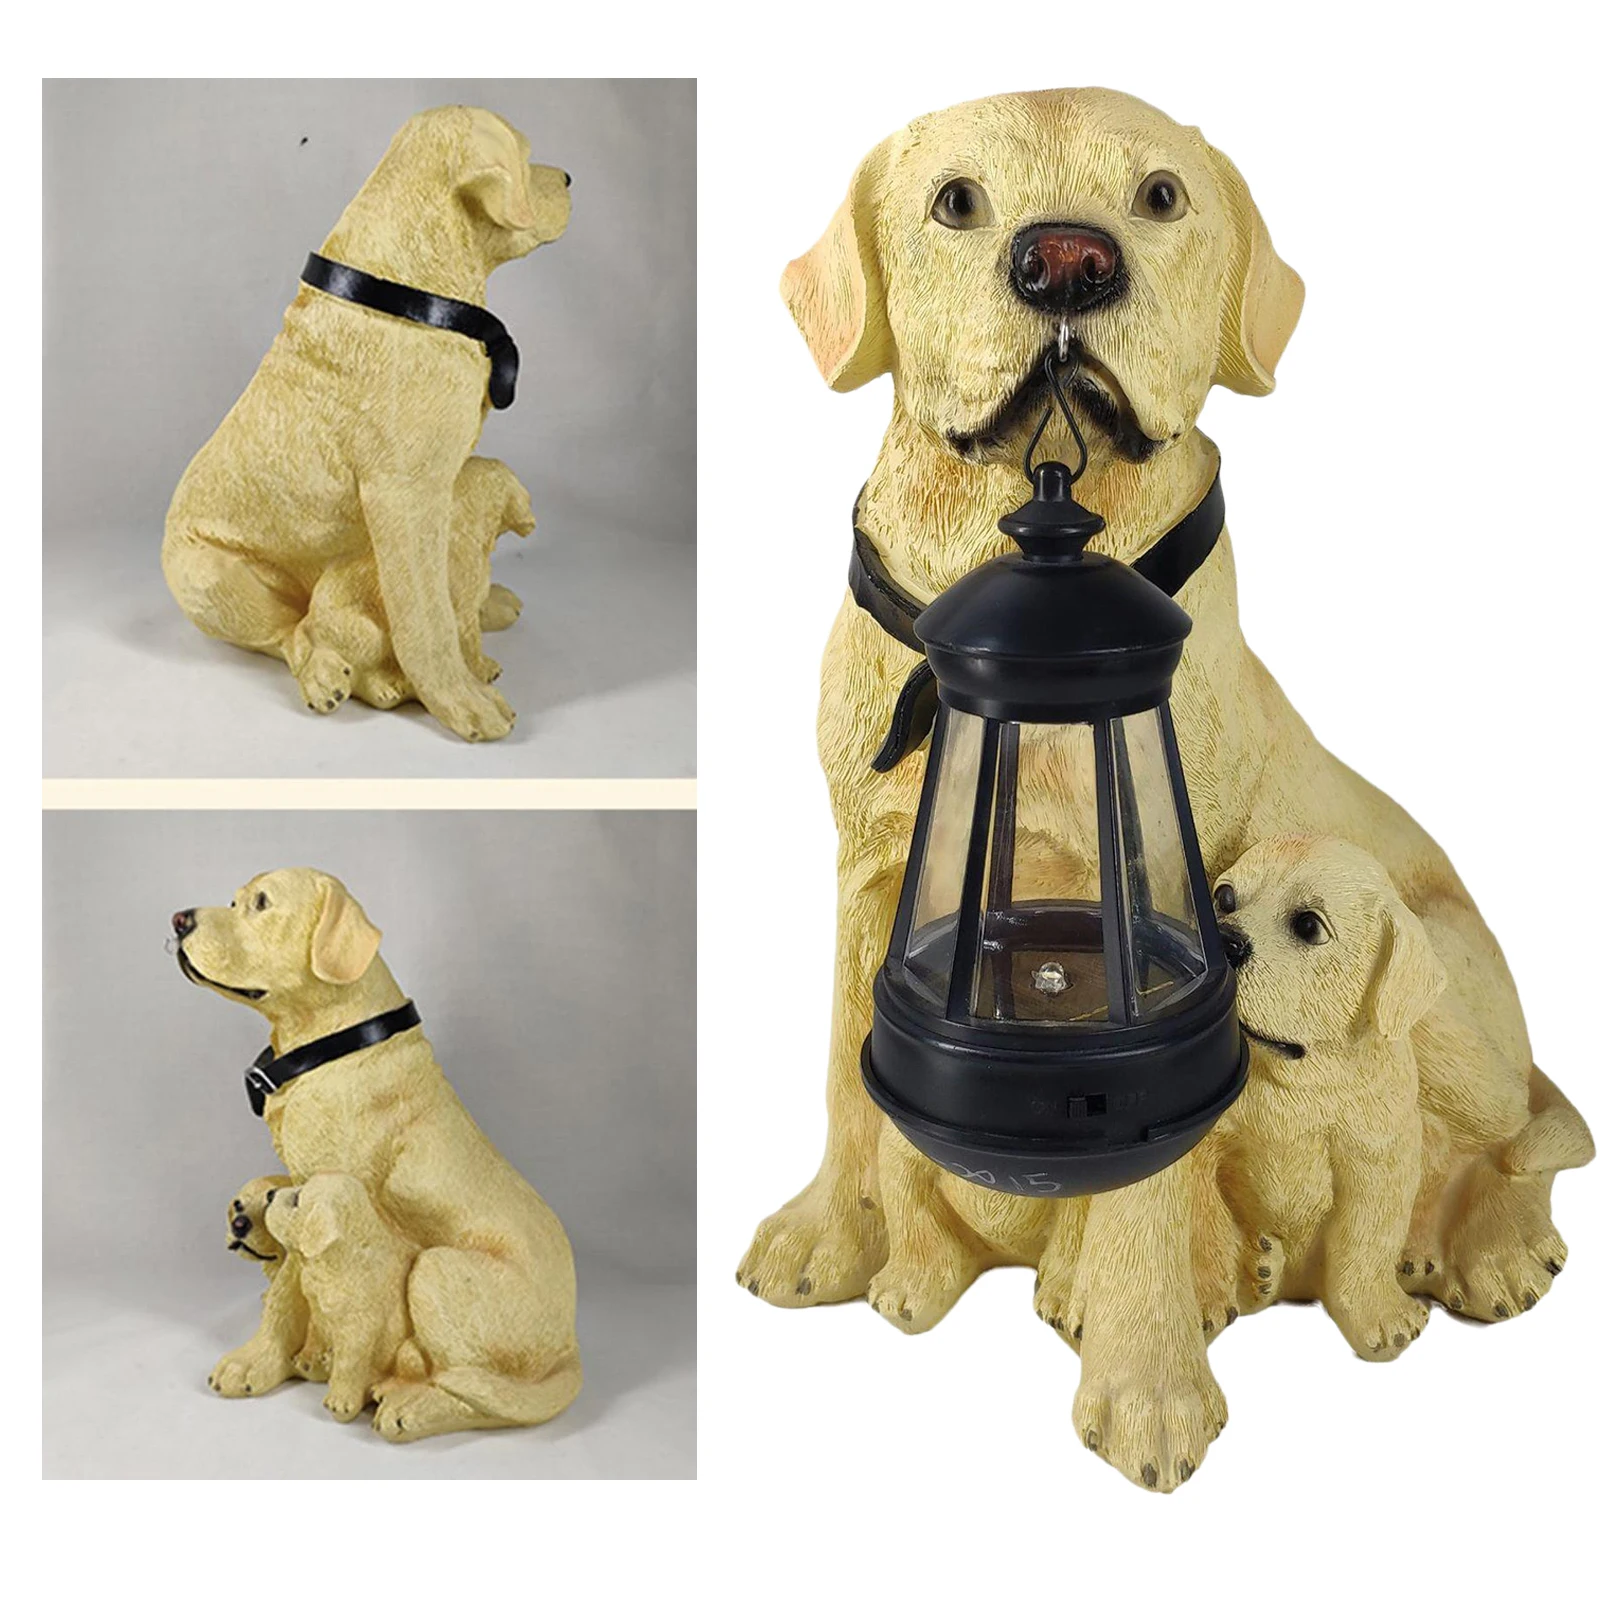 Outdoor dog  Ornament with, Golden Retriever / Labrador / Rottweiler Resin Statue with Detachable Lantern From